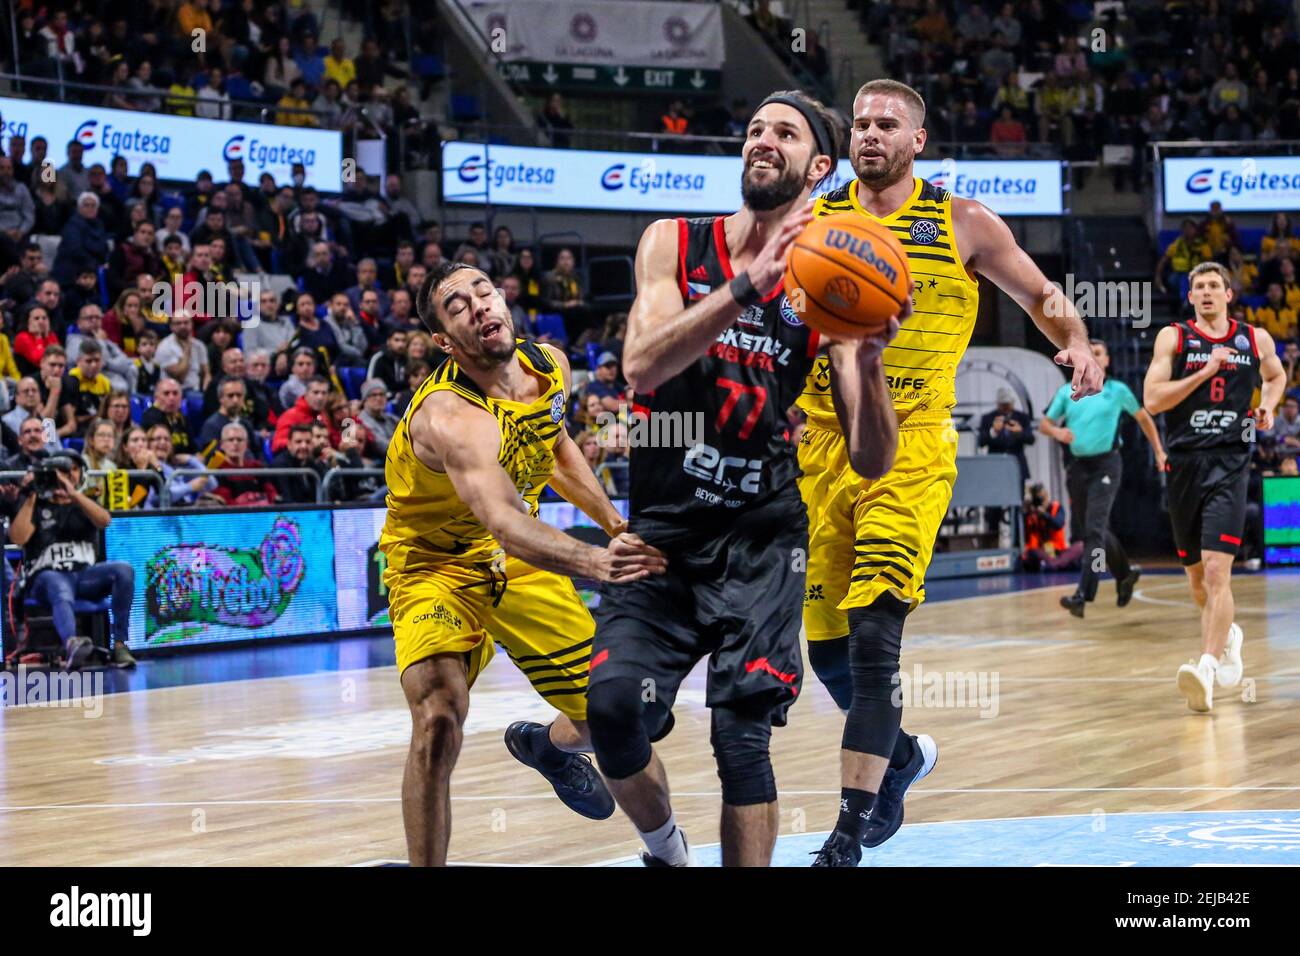 Vojtech Hruban, #77 of Cez Nymburk and Alex Lopez, #25 of Iberostar  Tenerife in action during the 2019/2020 Basketball Champions League Regular  Season Round 11 game between Iberostar Tenerife and Cez Nymburk